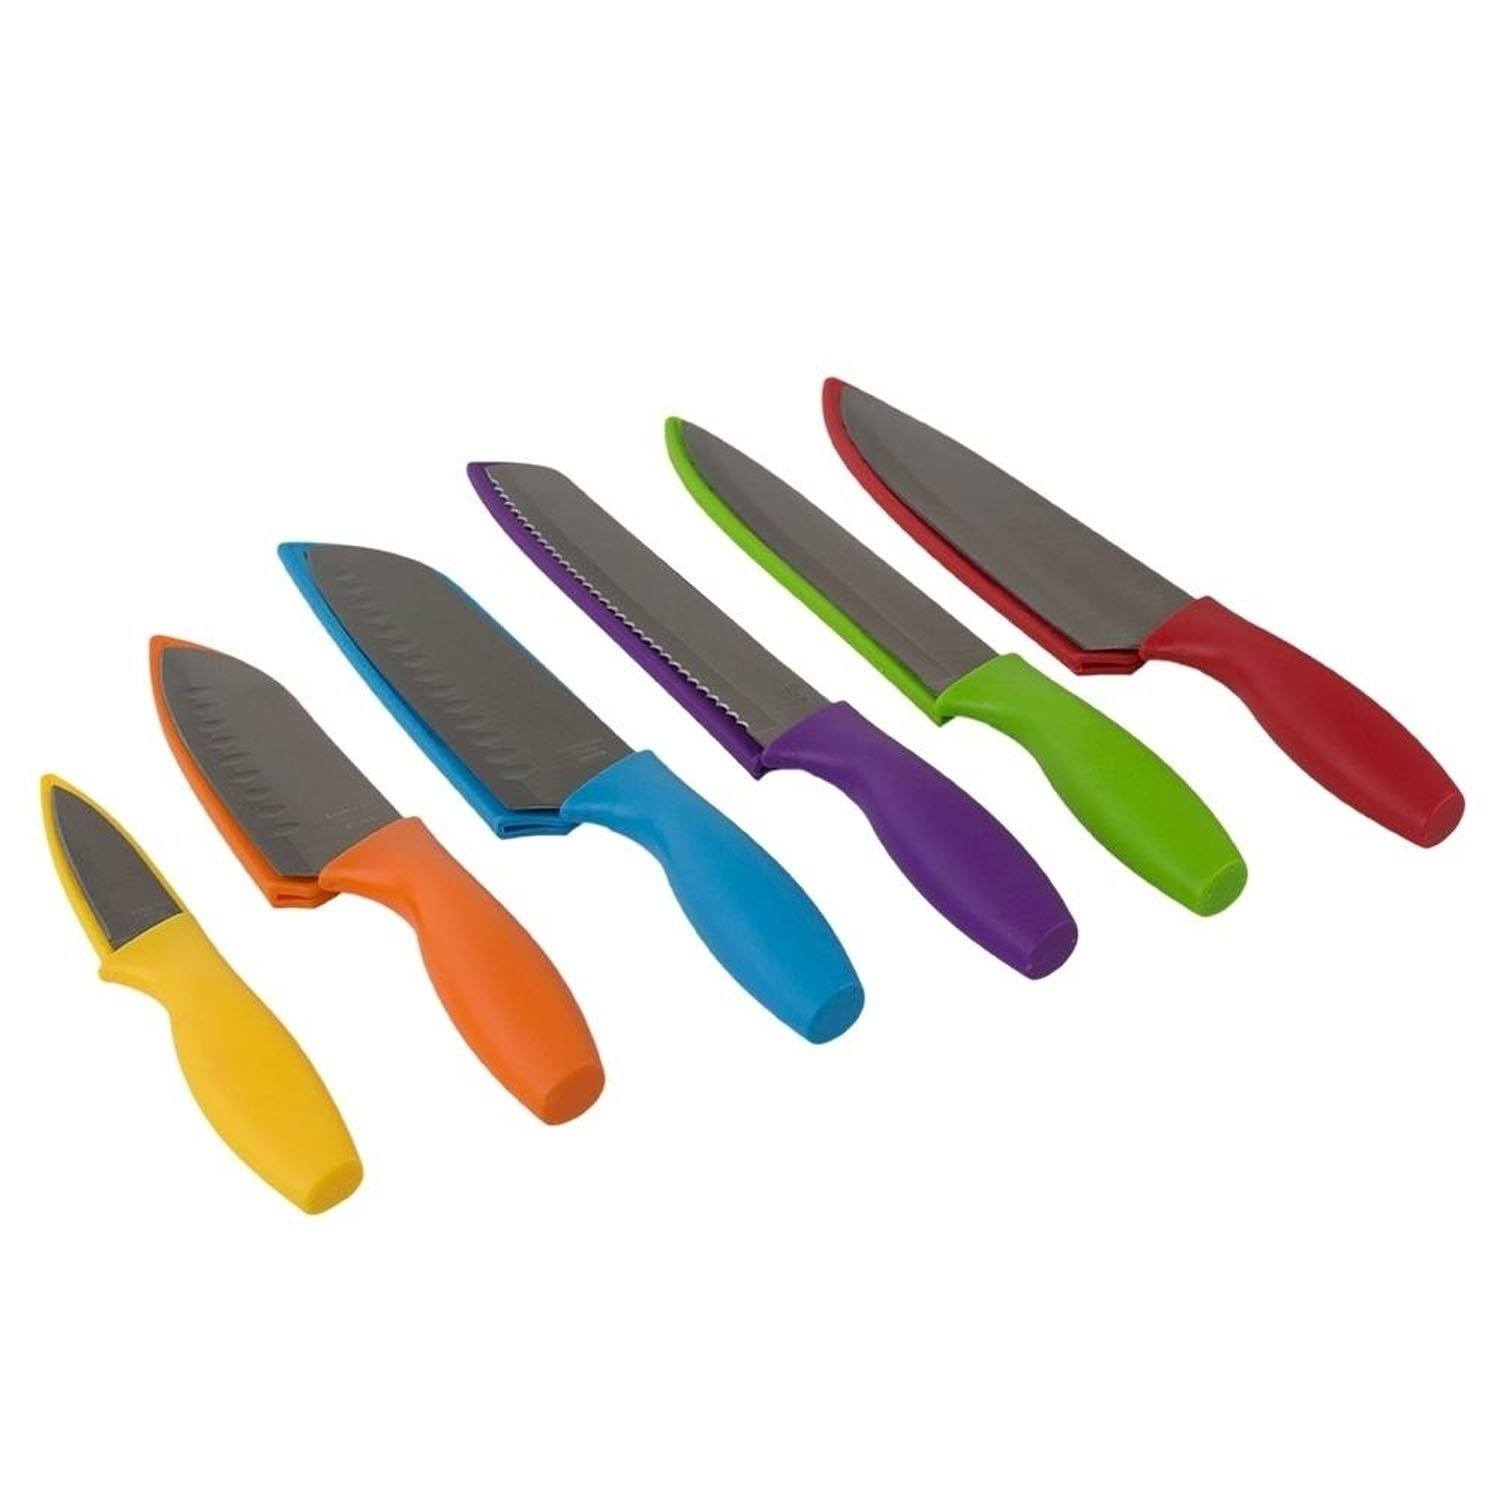 6 Stainless Steel Knife Set with Colorful Slip Covers, FOOD PREP